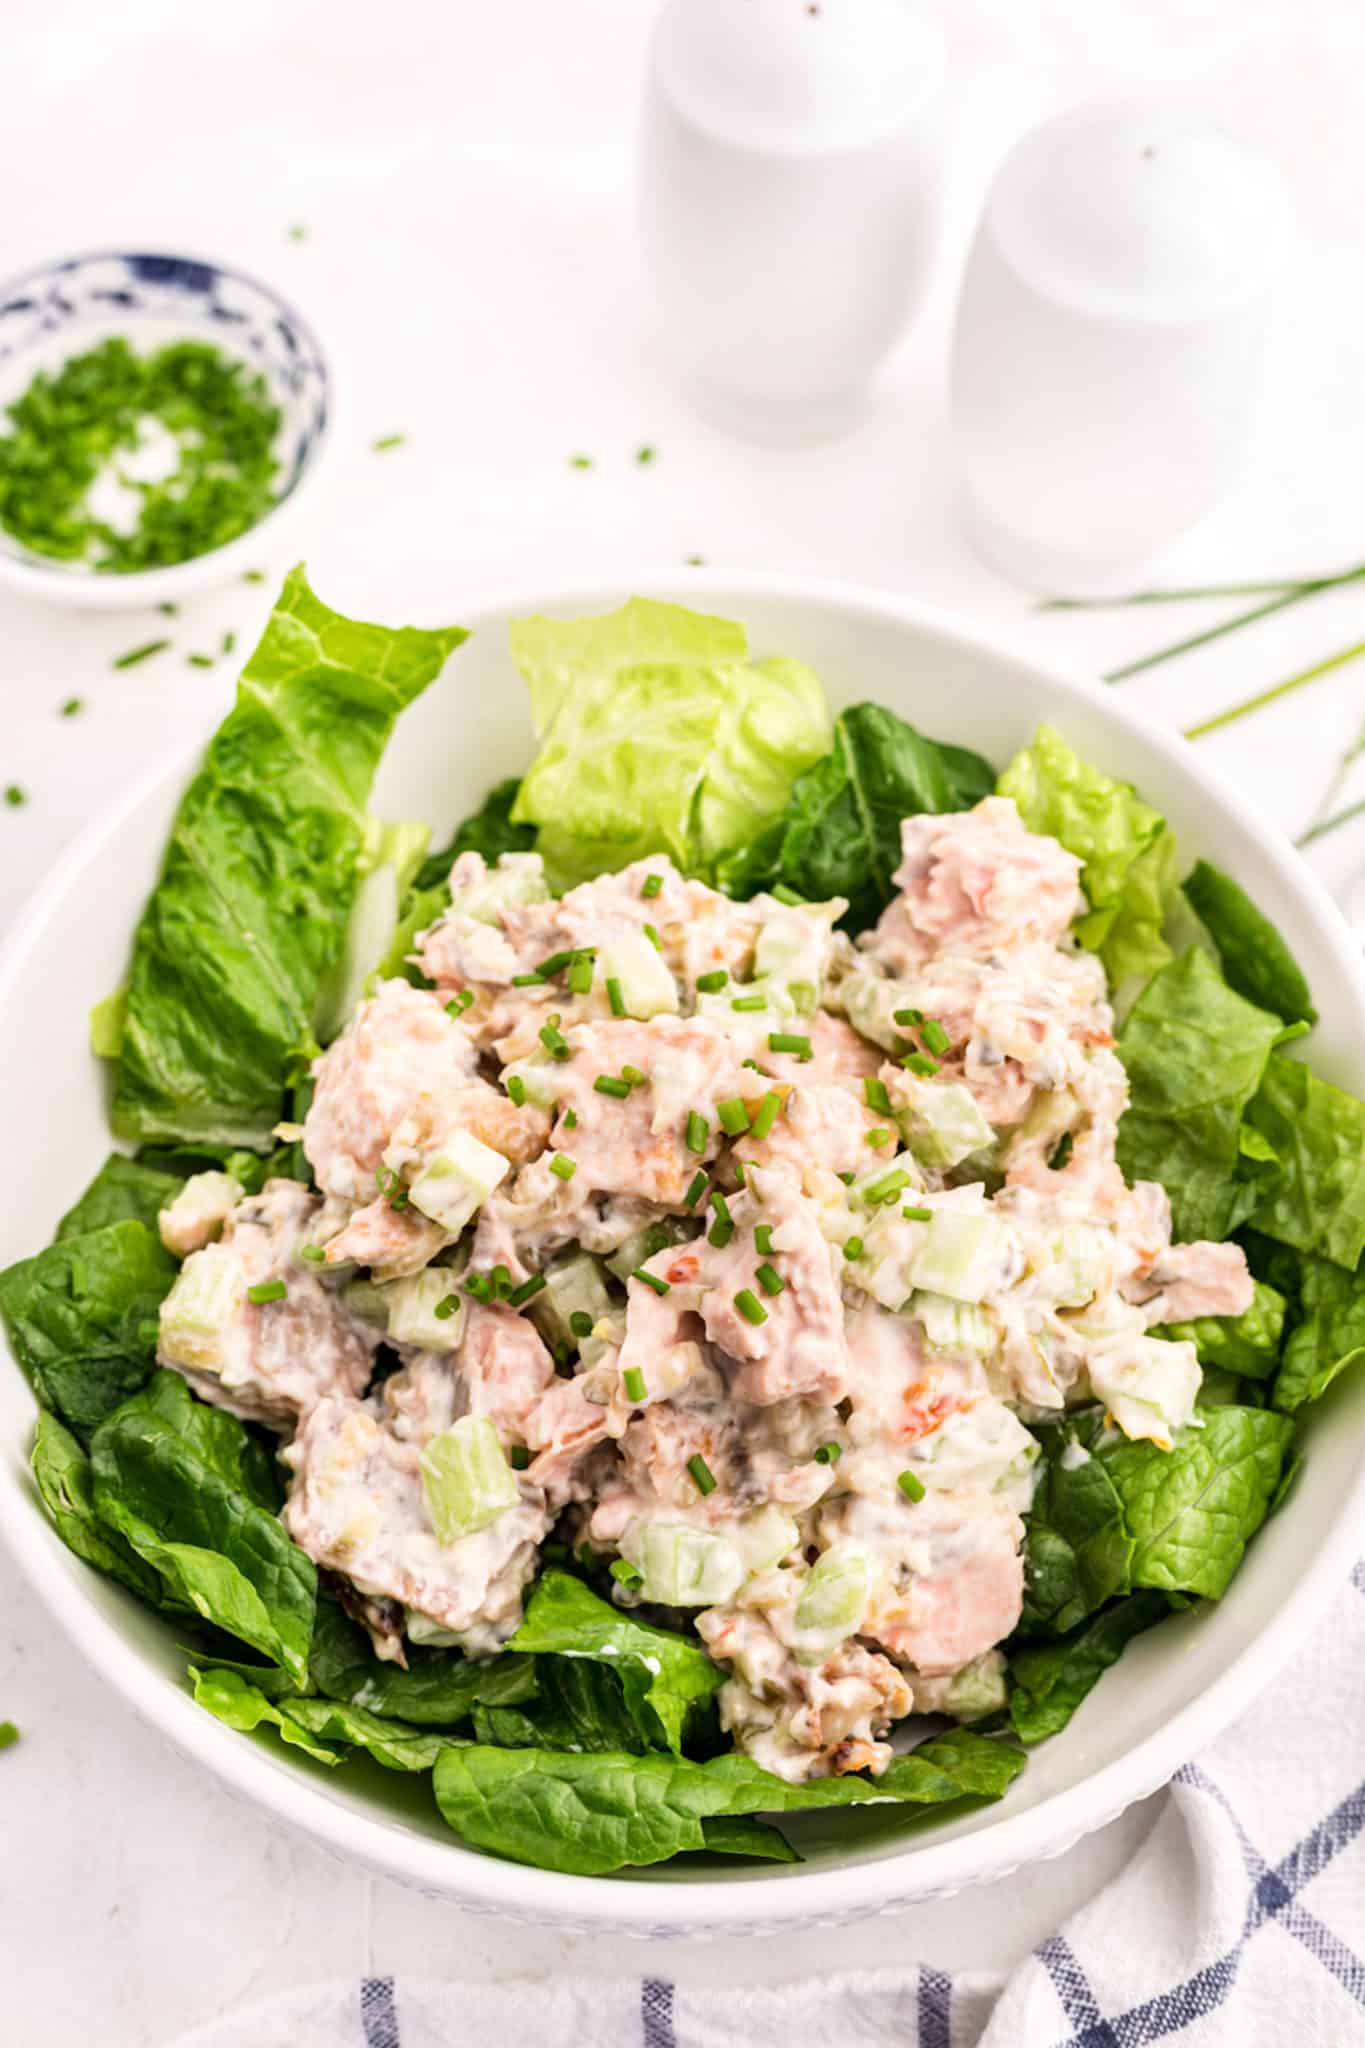 A large white salad bowl filled with greens topped with salmon salad.